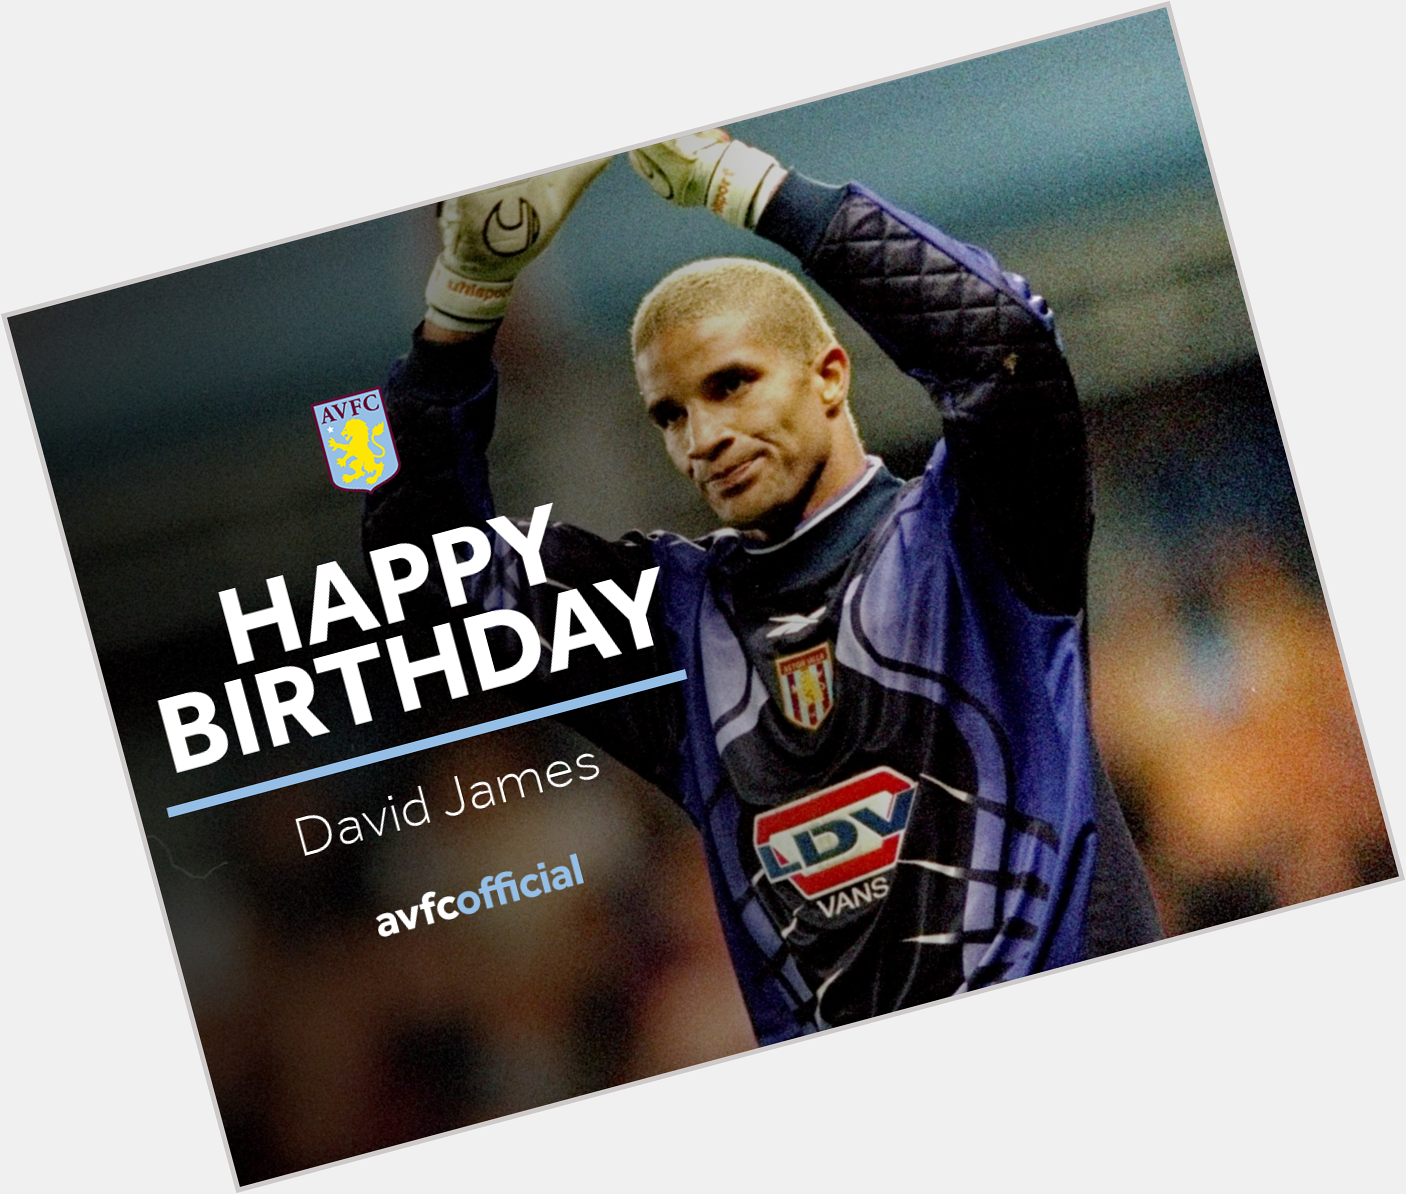 Happy birthday to the one and only David James  PC: Aston Villa 